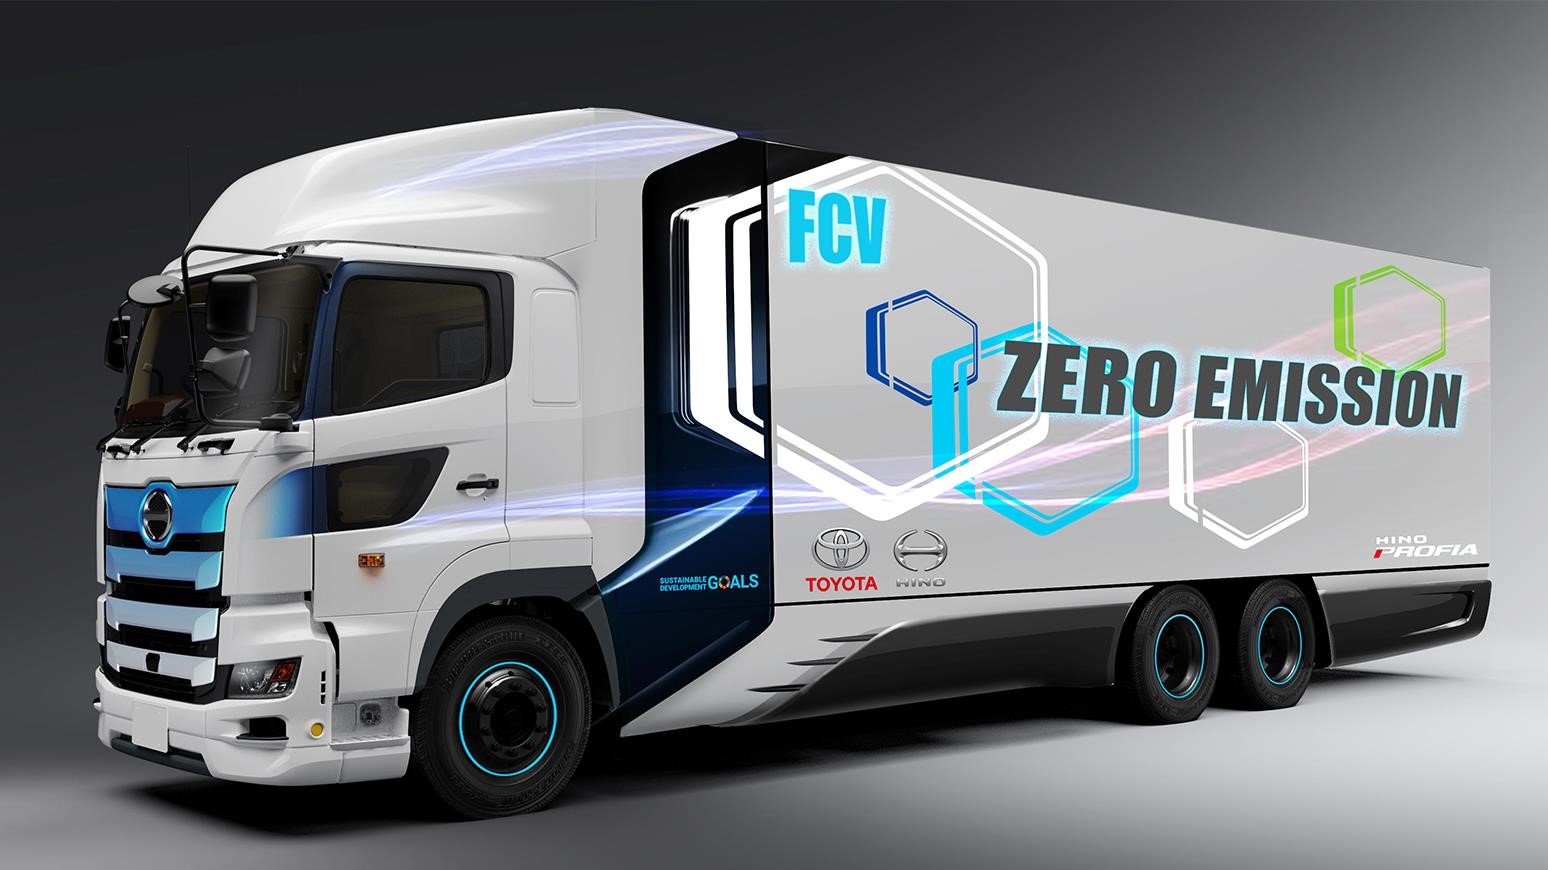 Hino & Toyota Announce Plans To Co-Develop A Heavy-Duty Hydrogen Fuel Cell-Powered Truck